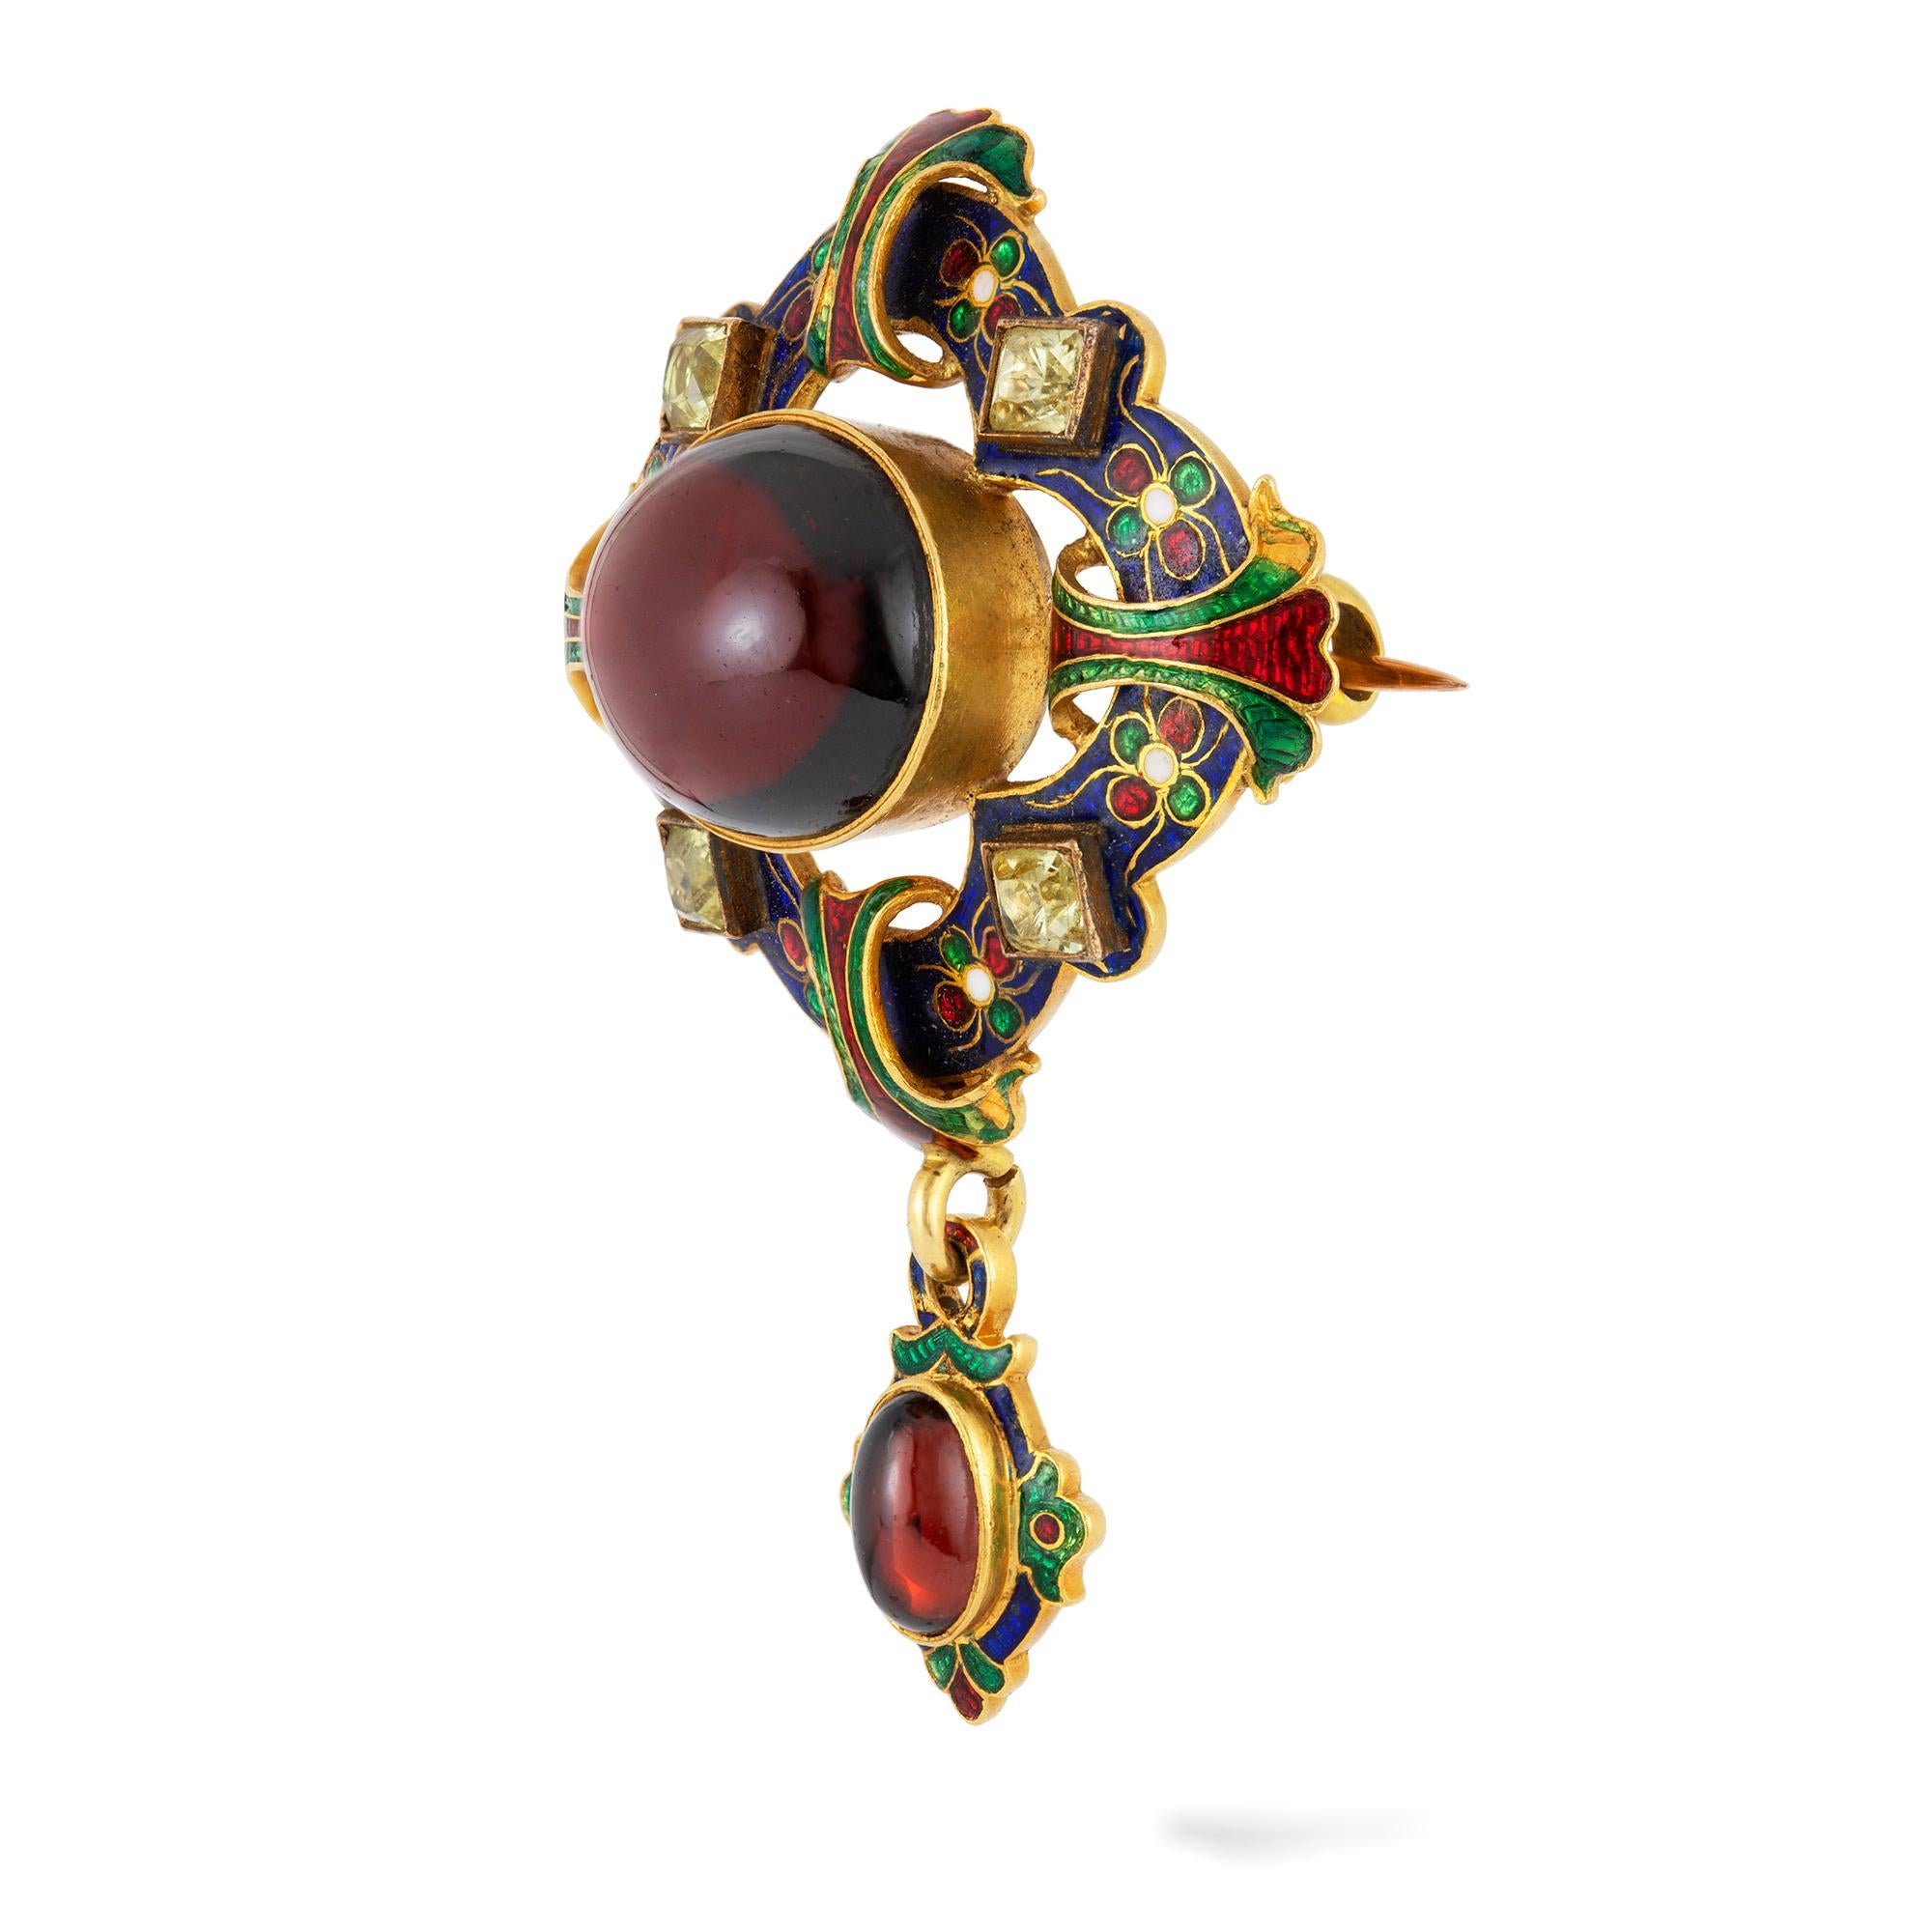 A Victorian Holbeinesque garnet and chrysoberyl brooch, to the centre an oval cabochon garnet measuring 14.5 x 12mm, surrounded by openwork scroll designed frame with polychrome champlevé enamel decorations, flanked by four square faceted